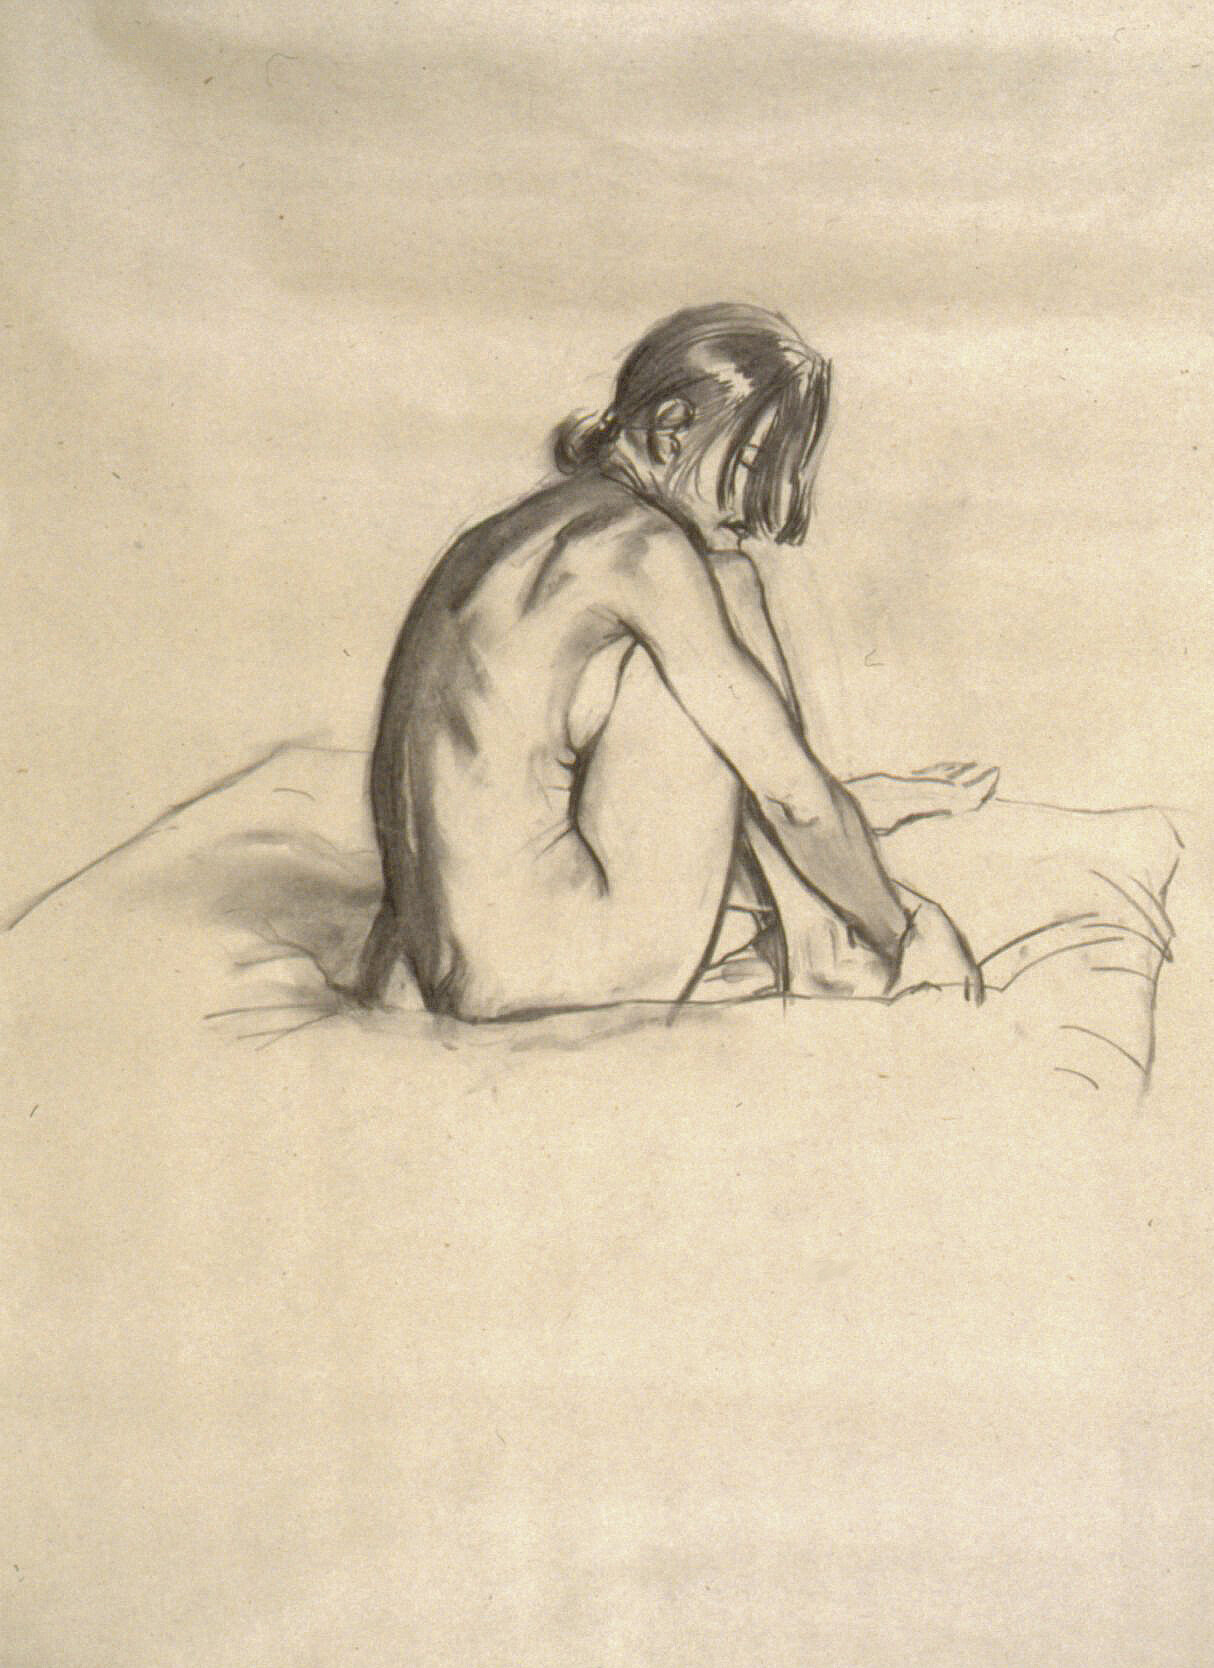 seated figure drawing